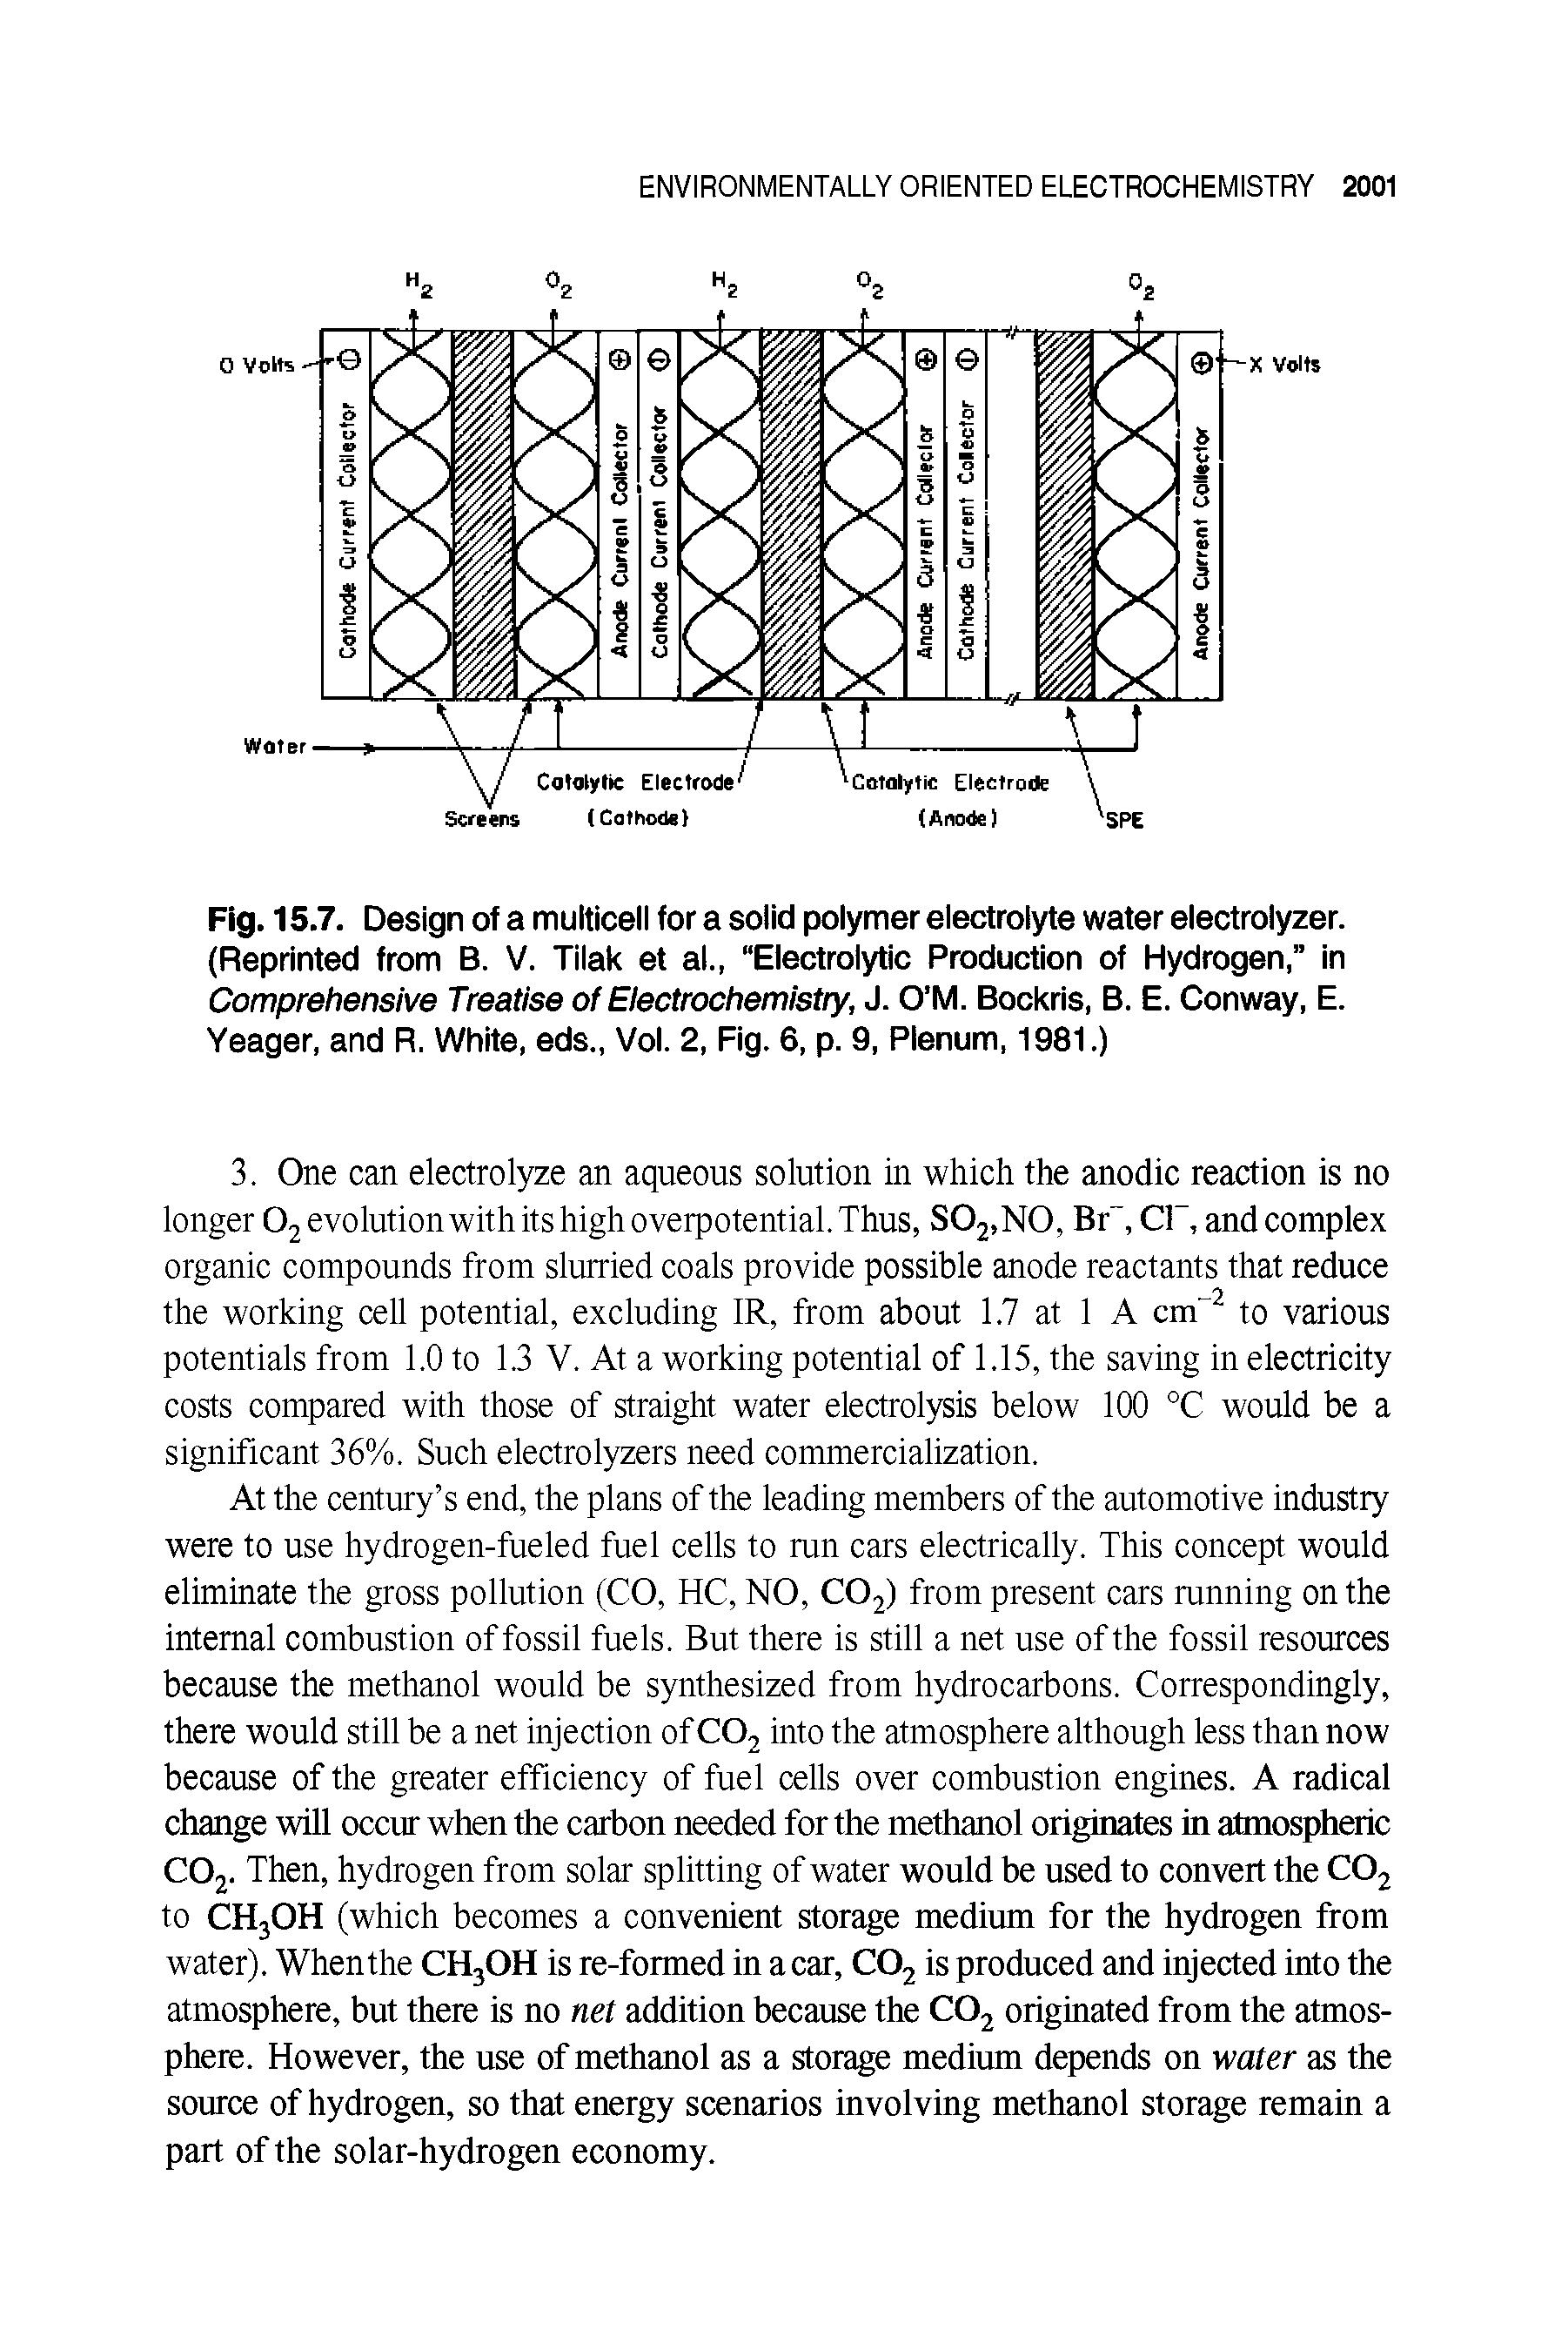 Fig. 15.7. Design of a multicell for a solid polymer electrolyte water electrolyzer. (Reprinted from B. V. Tilak et al., Electrolytic Production of Hydrogen, in Comprehensive Treatise of Electrochemistry, J. O M. Bockris, B. E. Conway, E. Yeager, and R. White, eds., Vol. 2, Fig. 6, p. 9, Plenum, 1981.)...